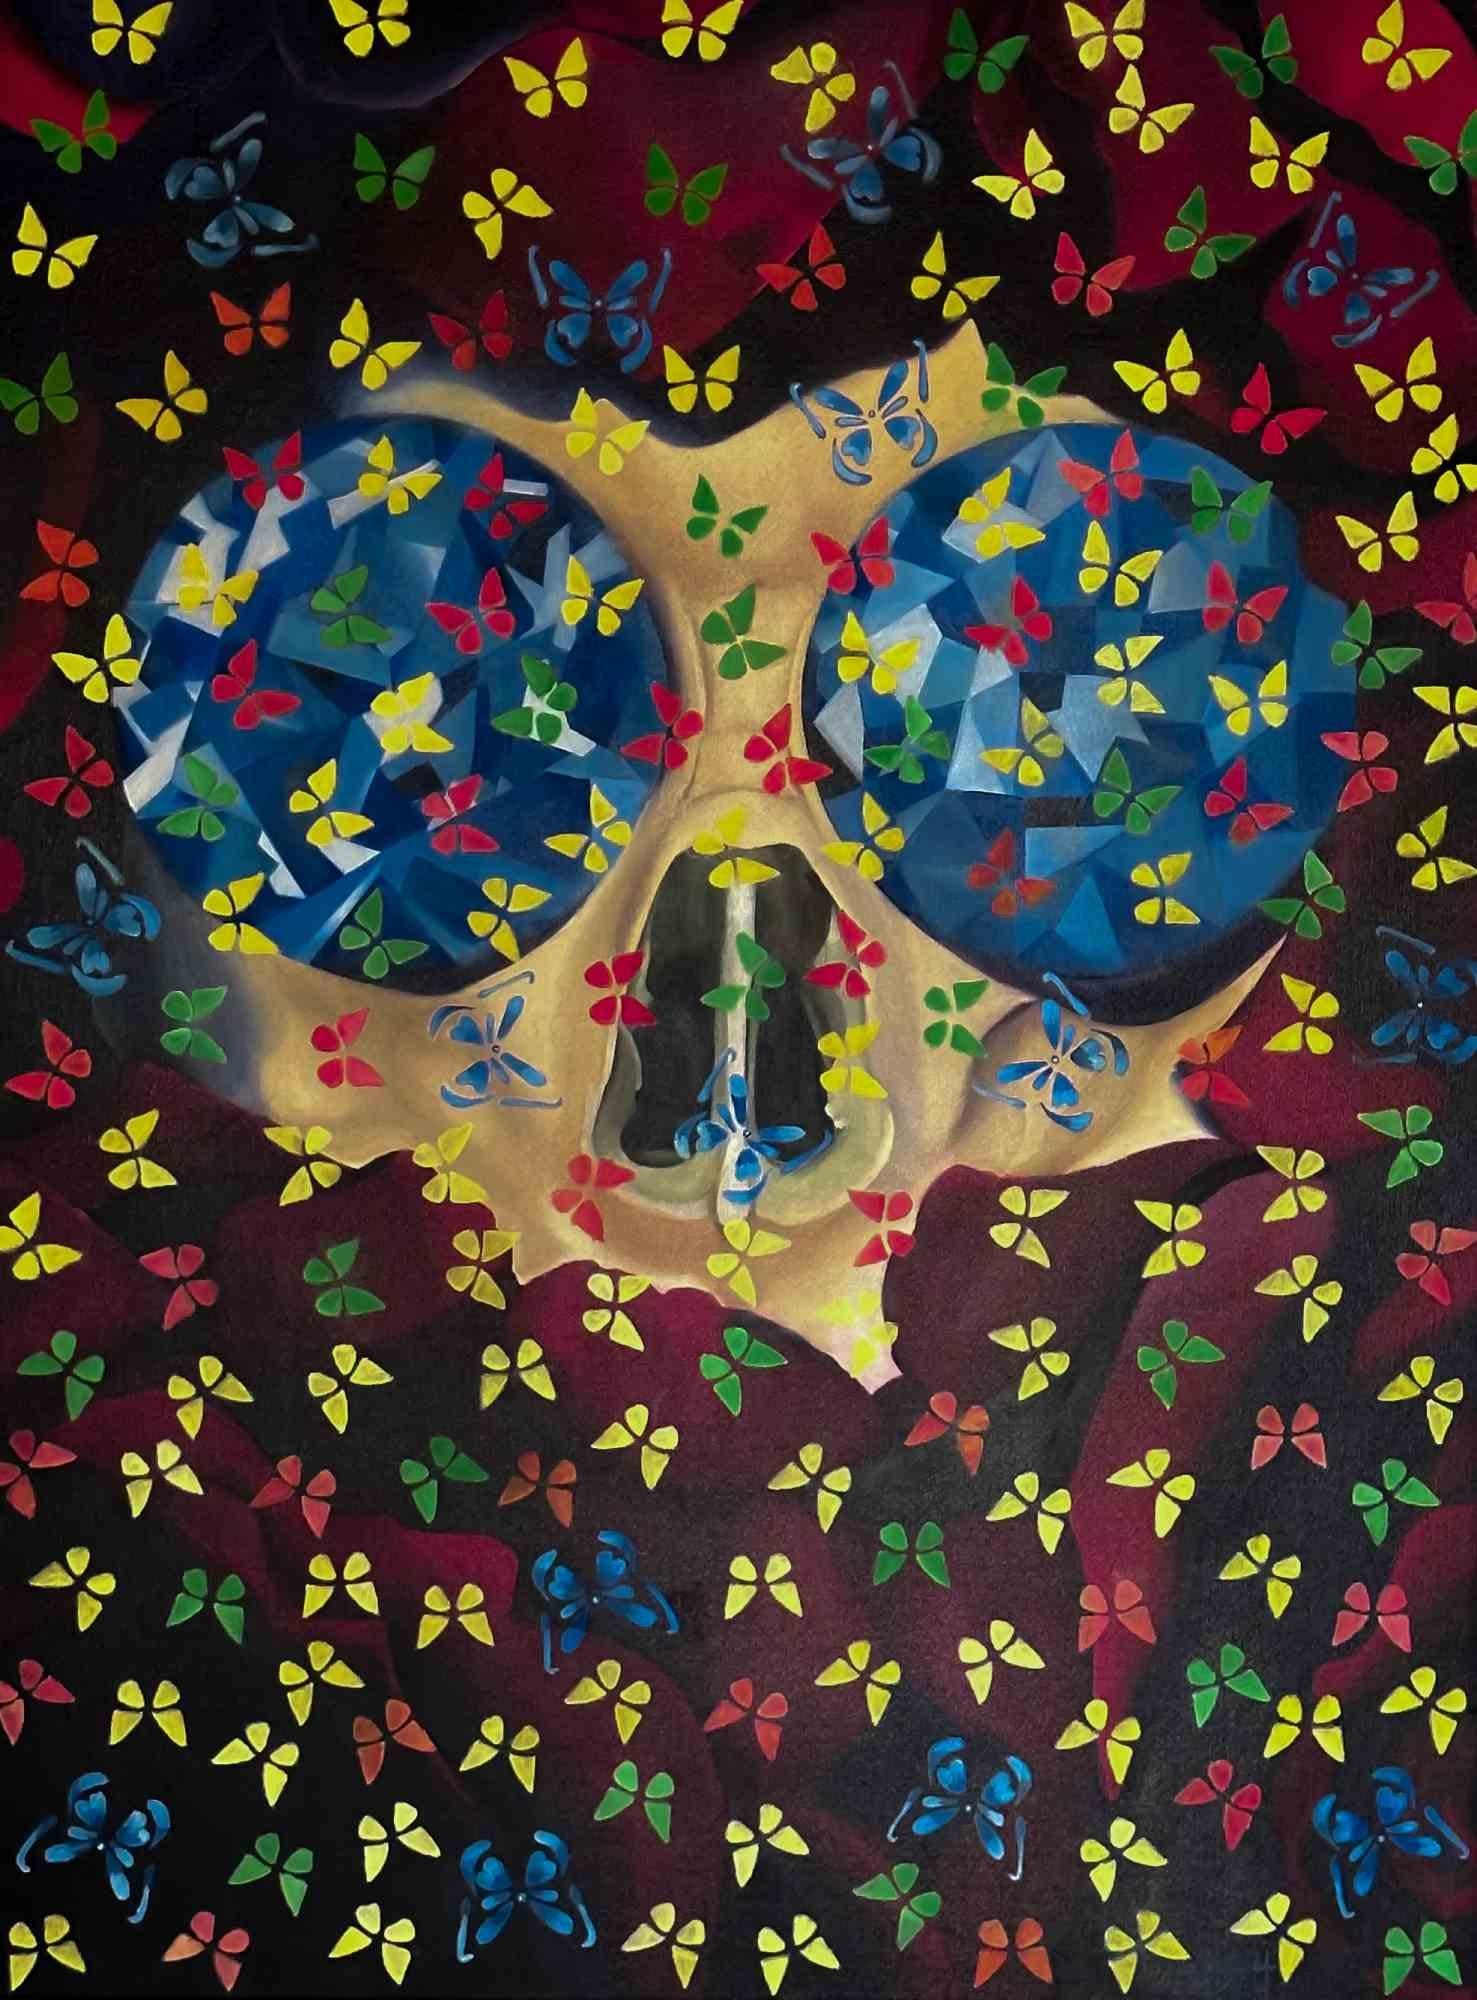 This painting is inspired by the cultural belief about butterflies and the cycle of life from the point of view of what comes from the ground returns to the ground. The roses, diamonds and skull represent that cycle of life and love. The